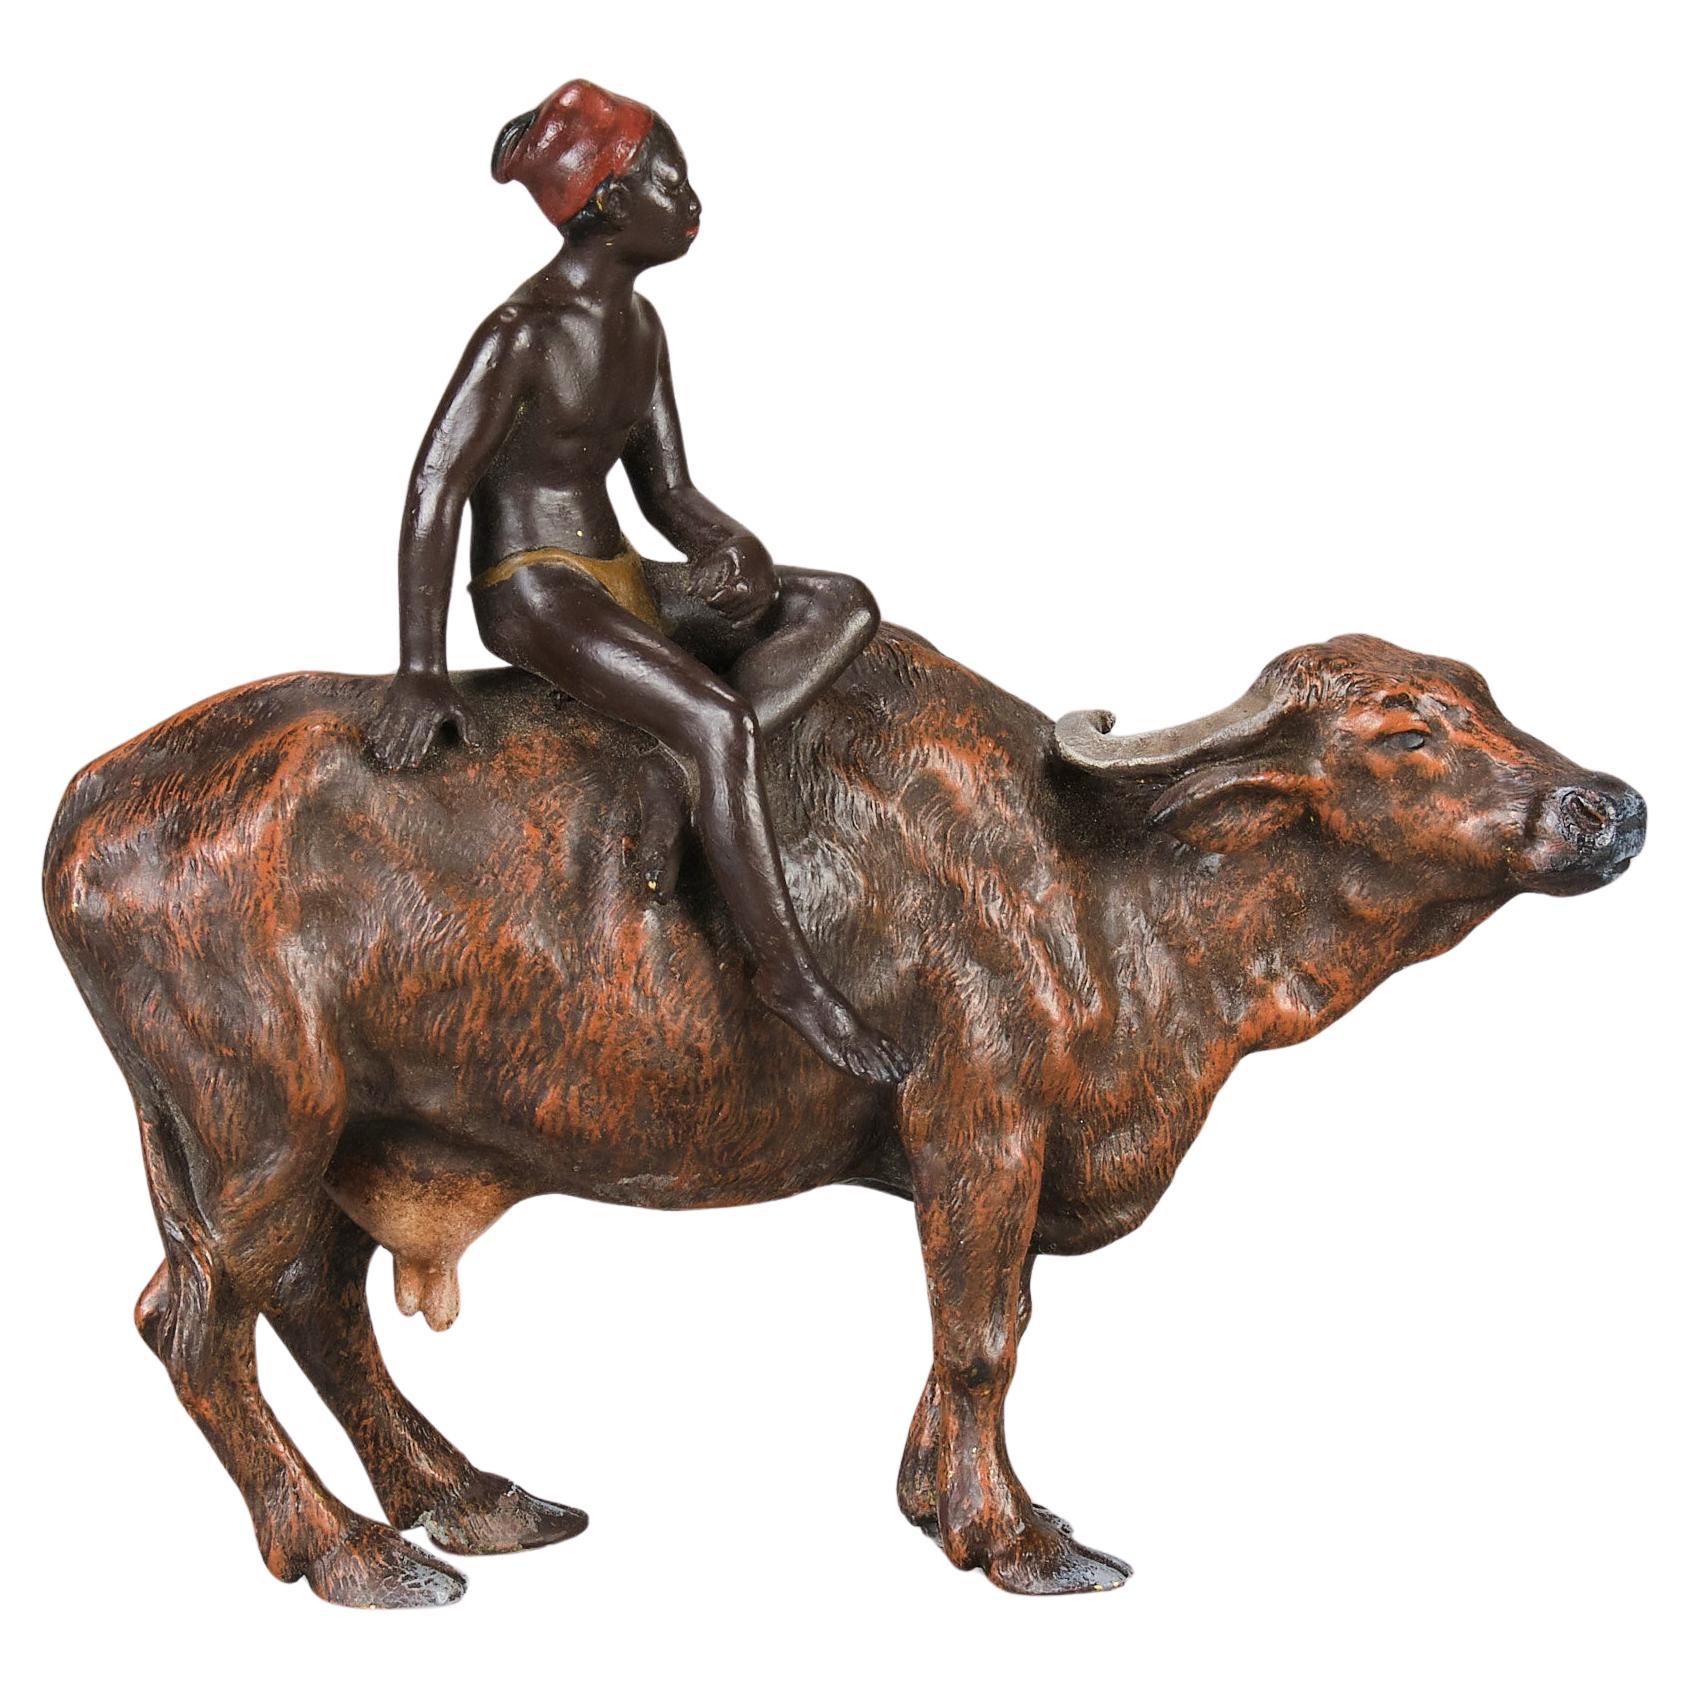 Early 20th Century Cold-Painted Bronze Sculpture "Boy on Ox" by Franz Bergman